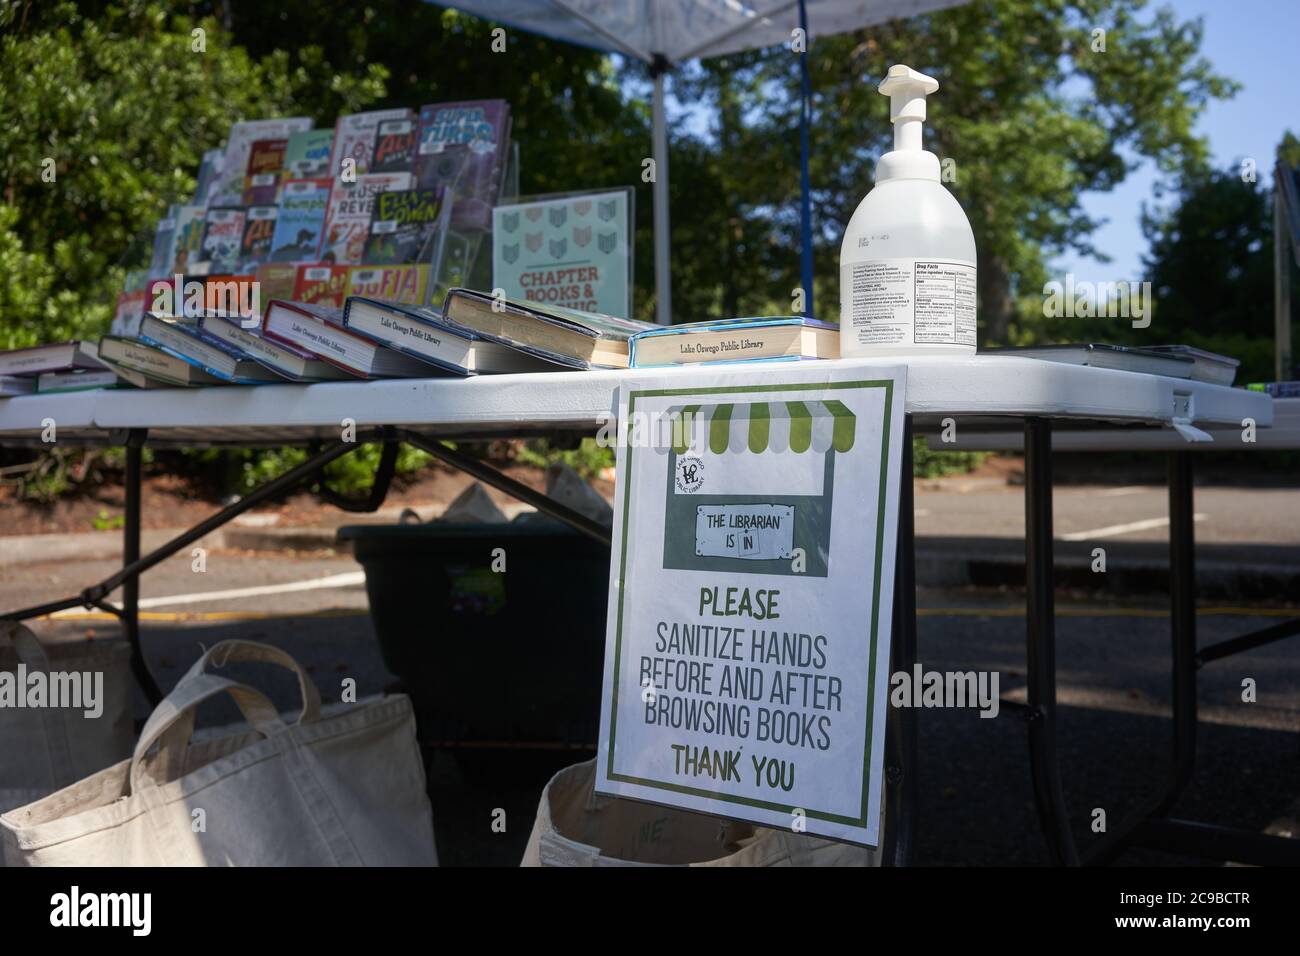 Signs at Lake Oswego's outdoor library remind readers to sanitize hands before and after browsing books to prevent the spread of the coronavirus. Stock Photo